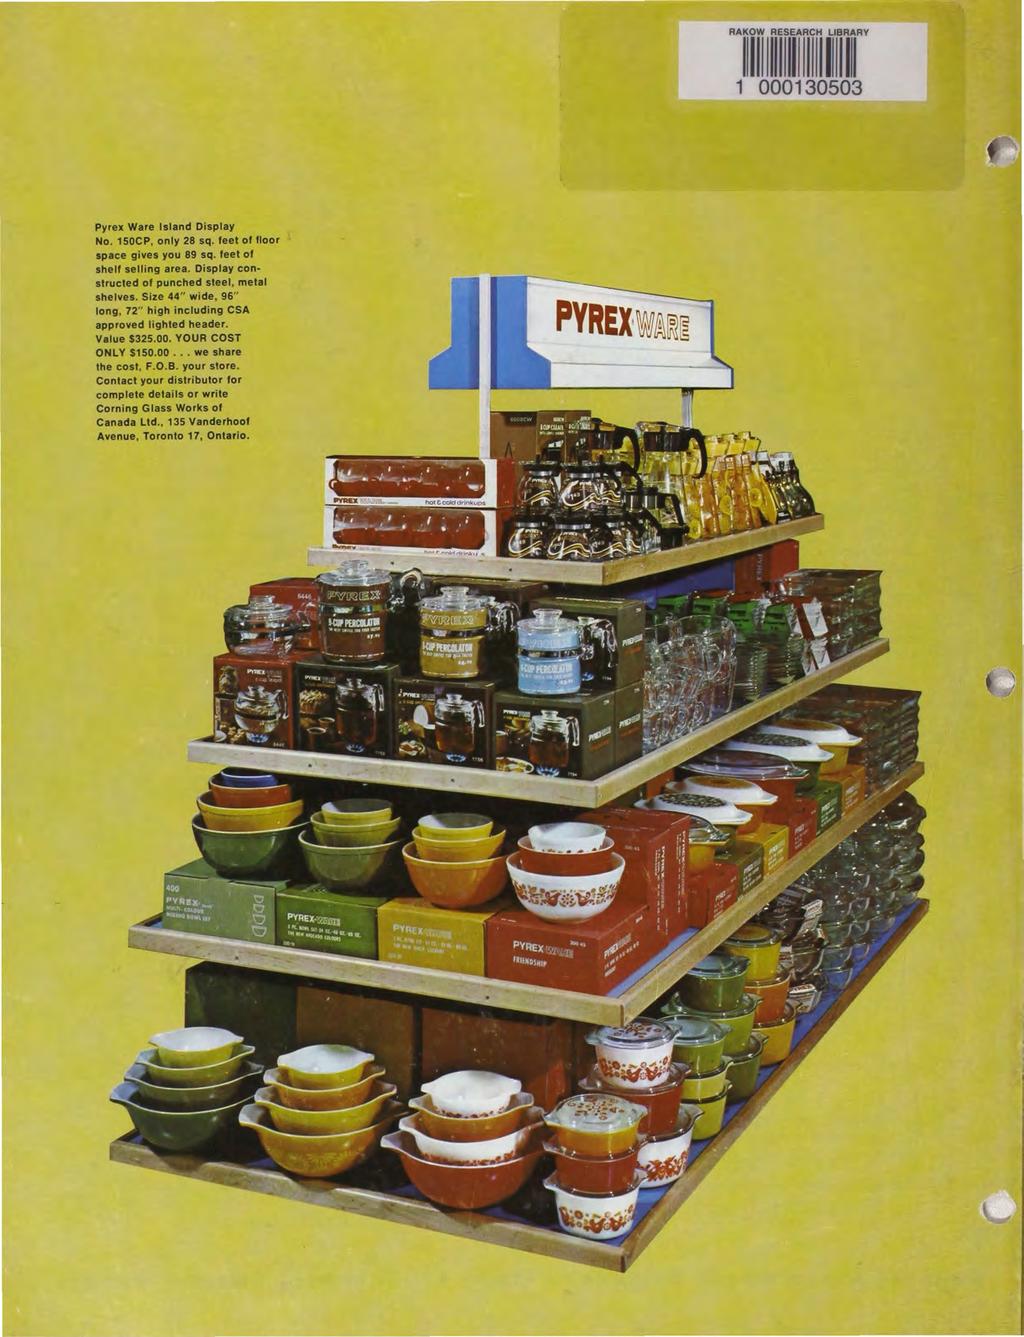 1 ~ii1irnrn tmr RA~w 1 000130503 Pyrex Ware Island Display No. 150CP, only 28 sq. feet of floor space gives you 89 sq. feet of shelf selling area. Display con structed of punched steel, metal shelves.